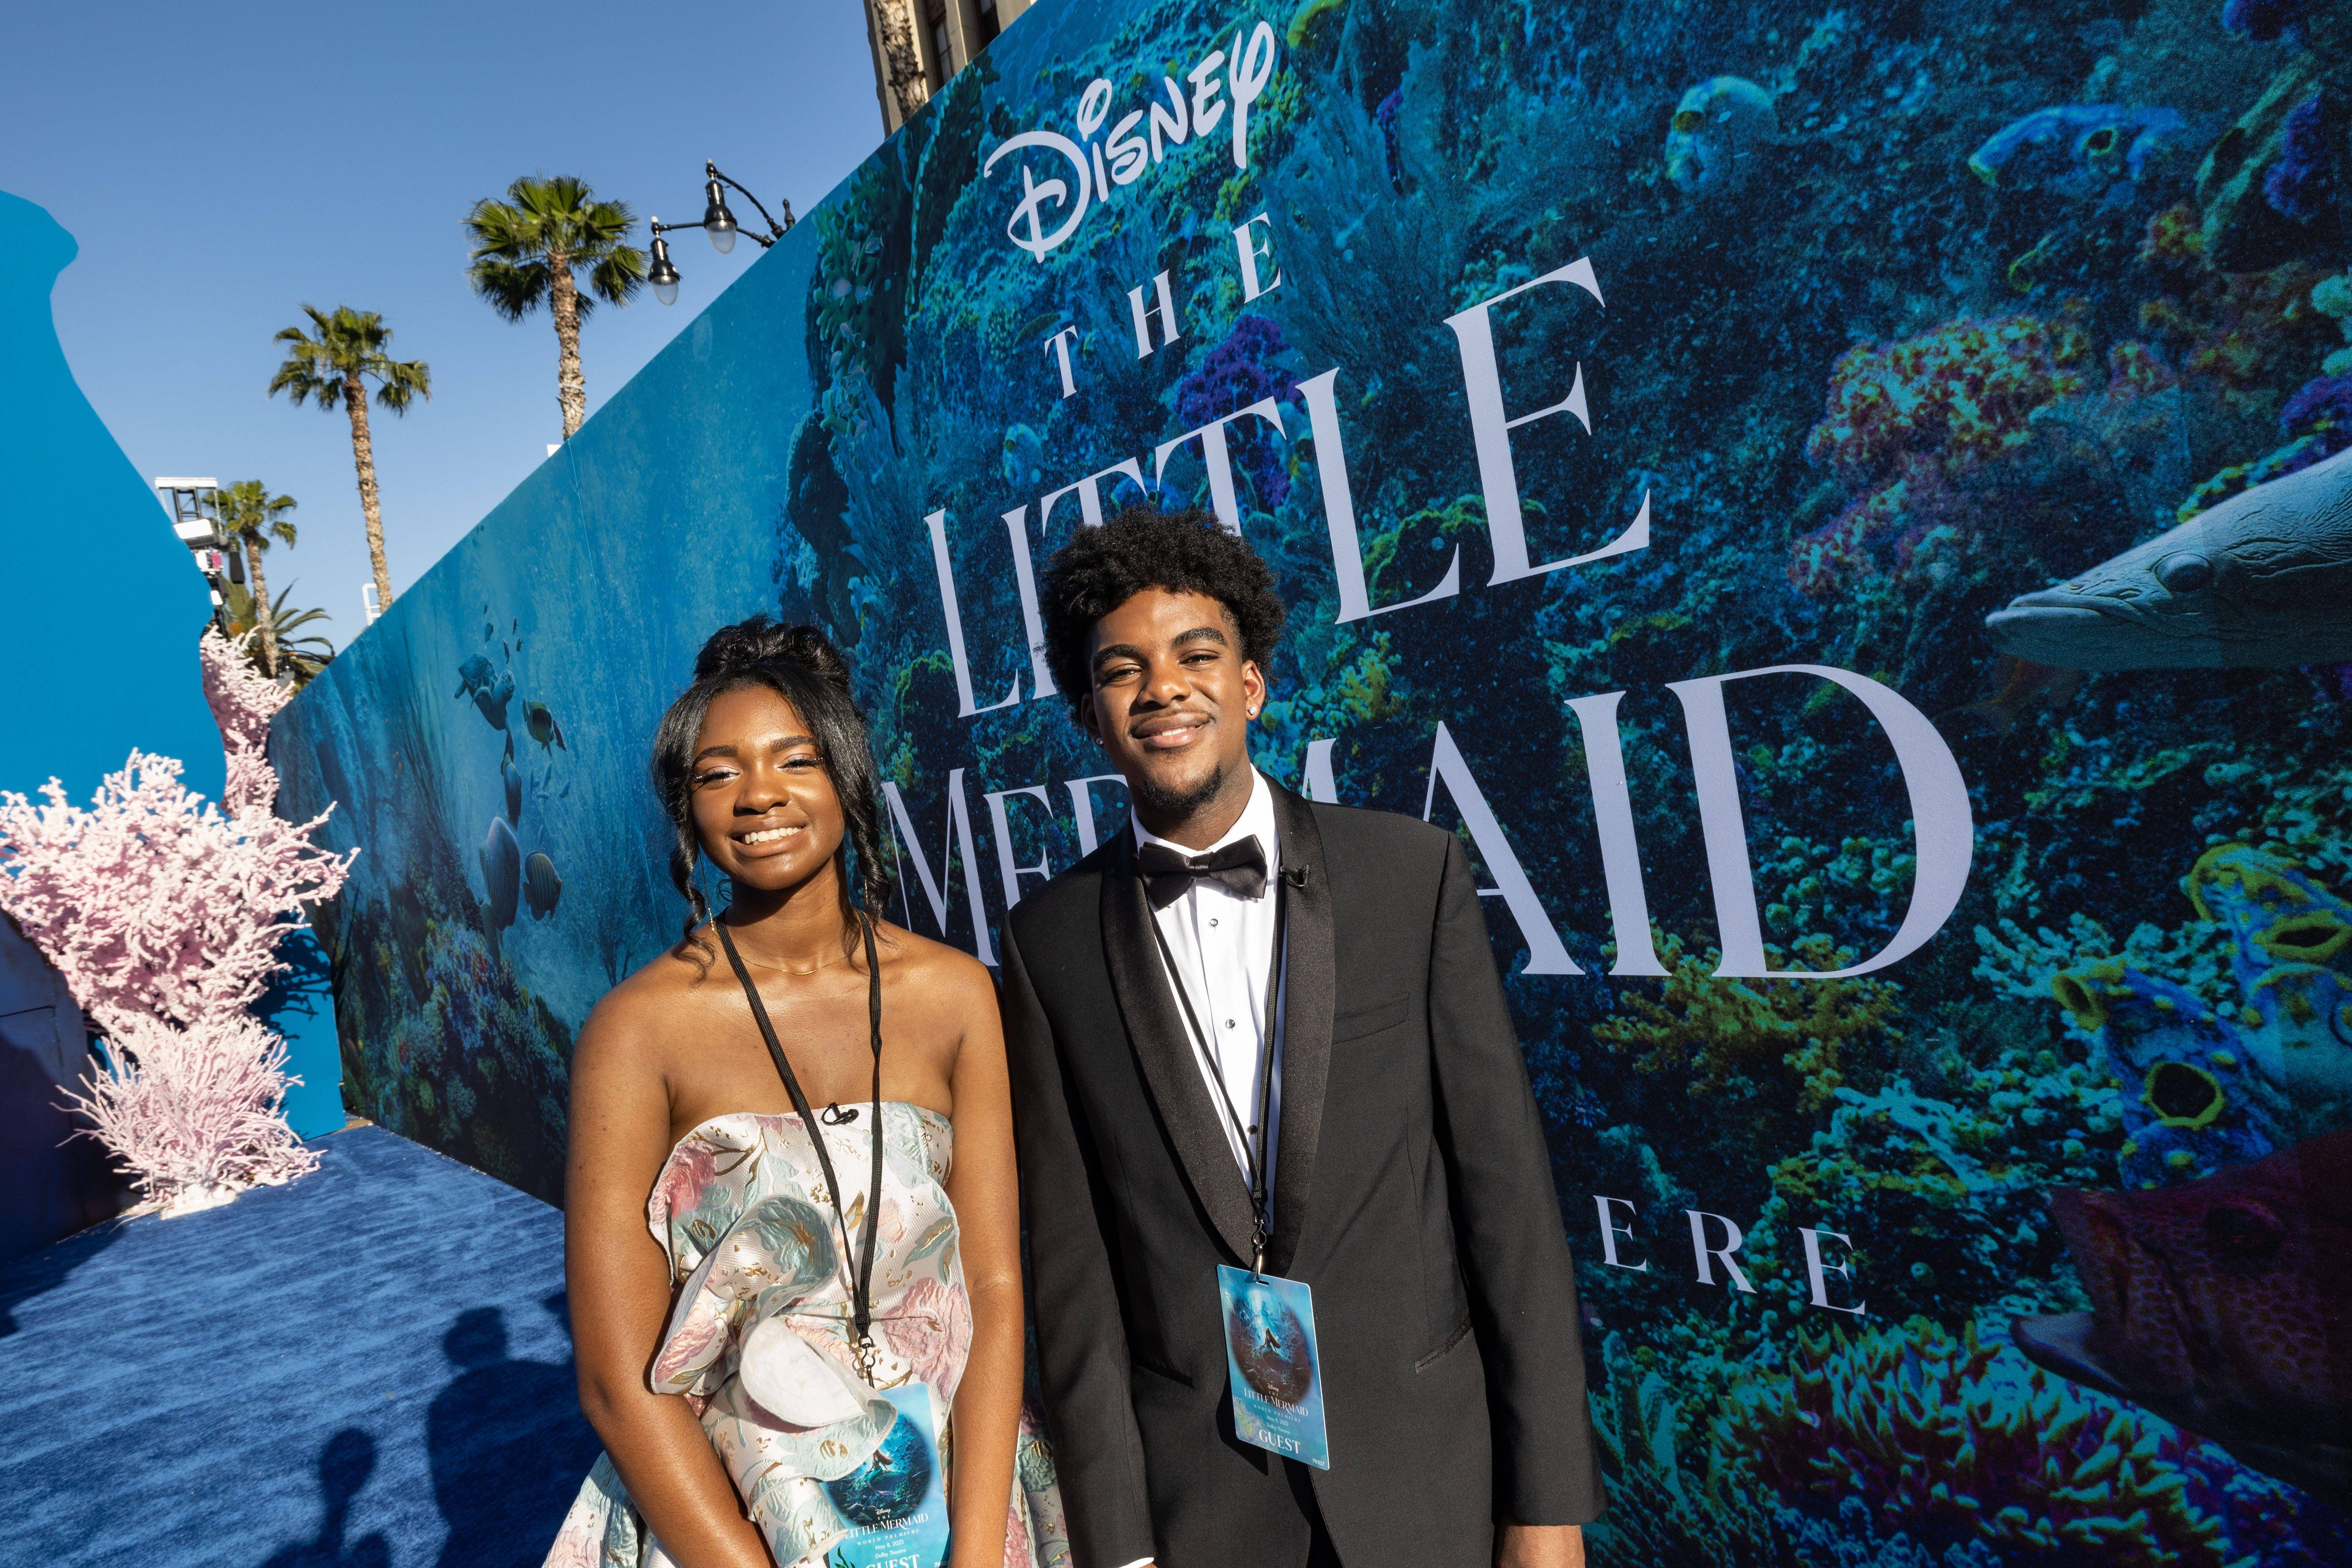 Disney Dreamers Attend 'The Little Mermaid' World Premiere with singer Halle Bailey